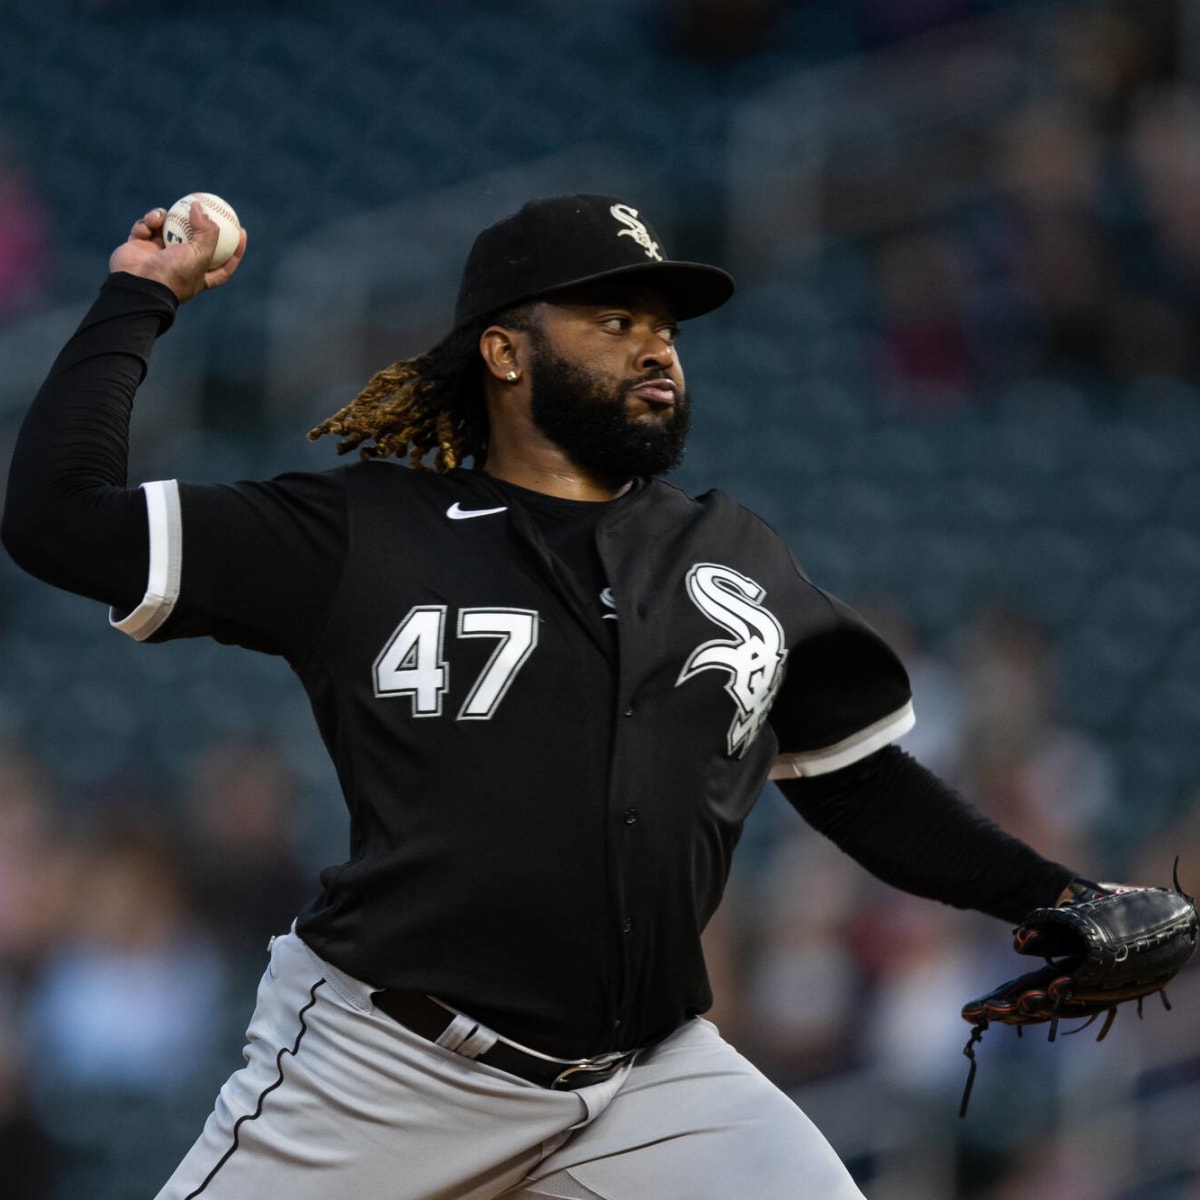 Johnny Cueto: From 'short and skinny' to All-Star